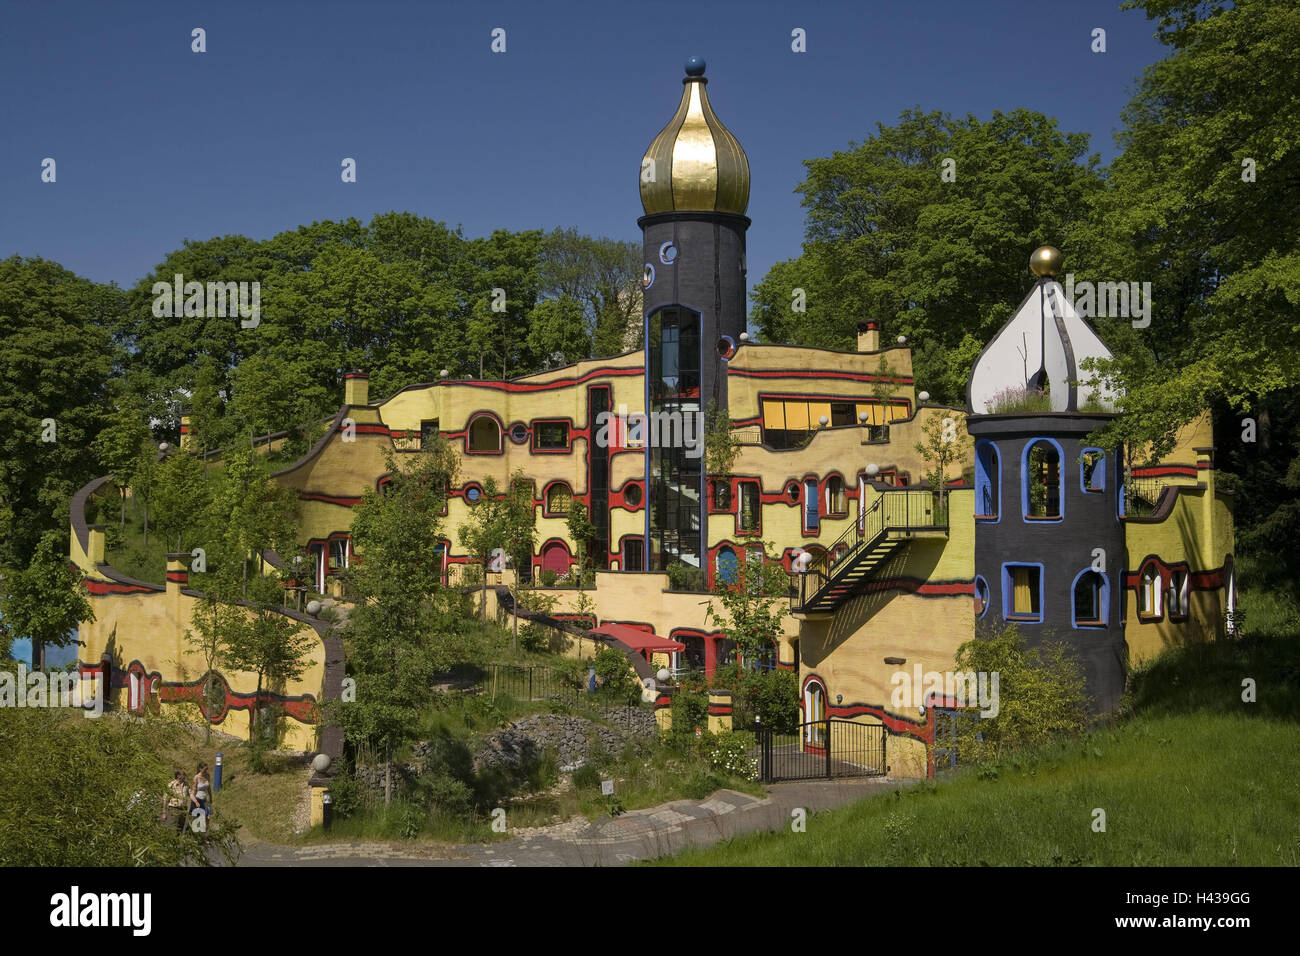 Germany, North Rhine-Westphalia, food, Grugapark, 100 water house, park, building, art, architecture, 100 water, towers, outside, facade, place of interest, Stock Photo